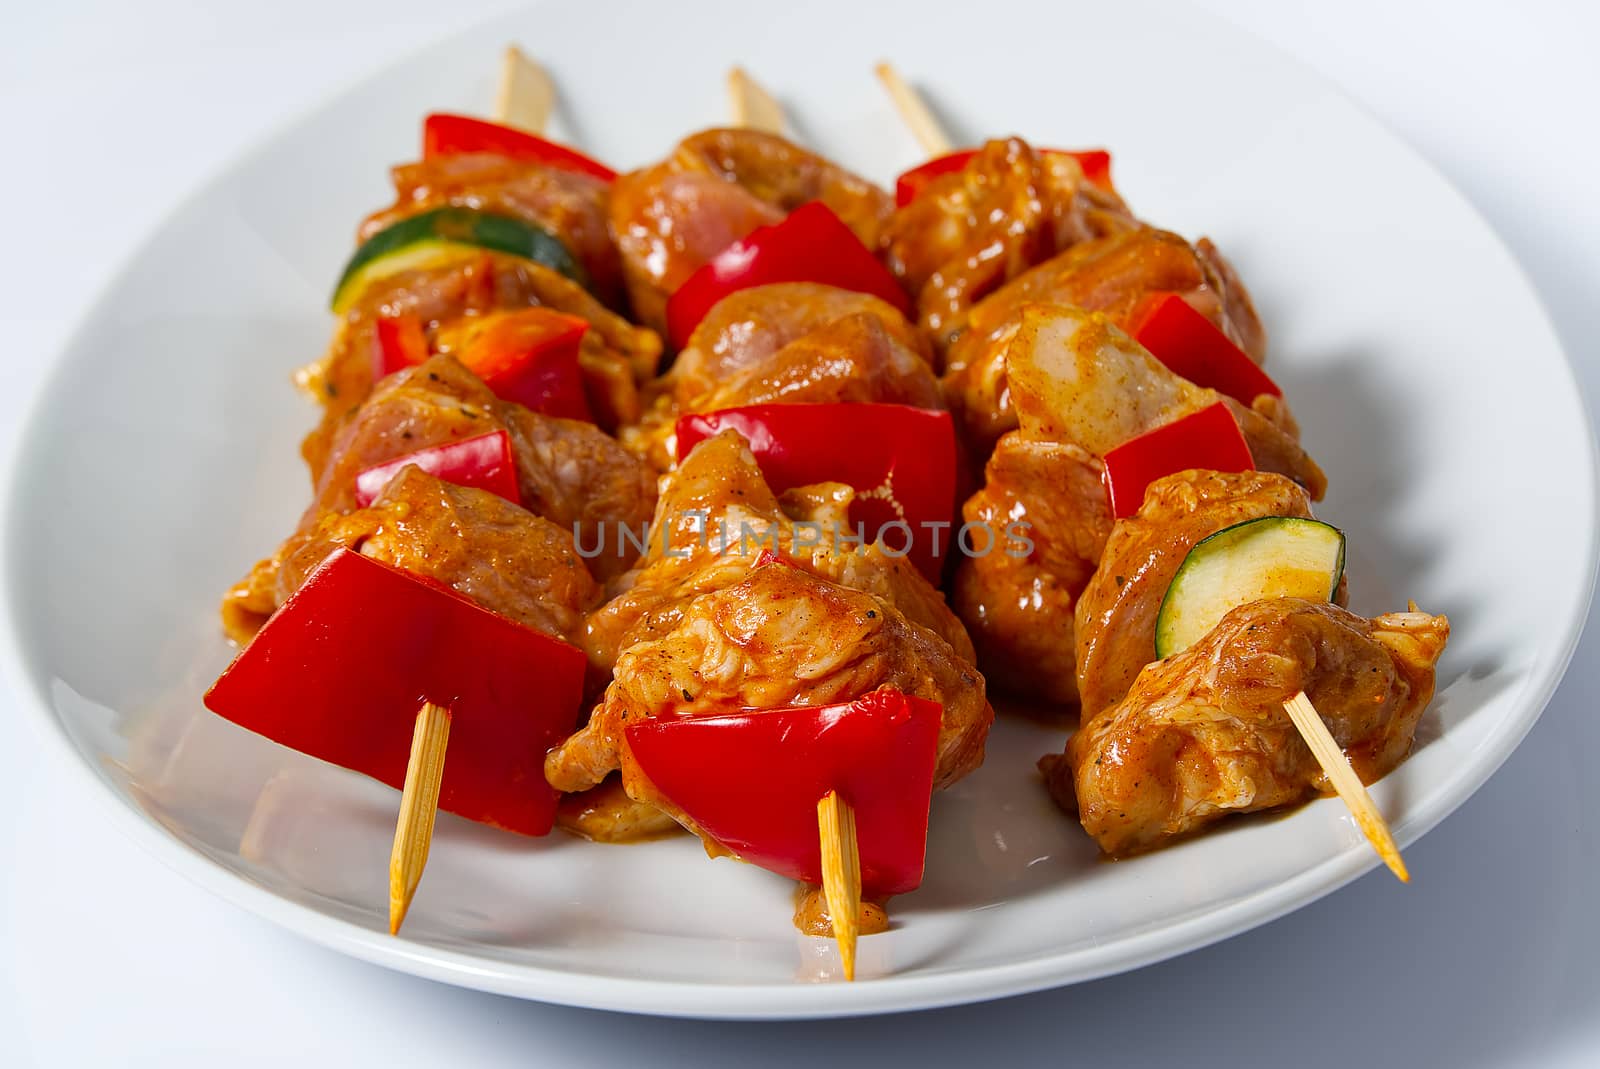 raw marinated chicken meat on wooden skewers, pork, chicken, beef in white plate on white background. by PhotoTime